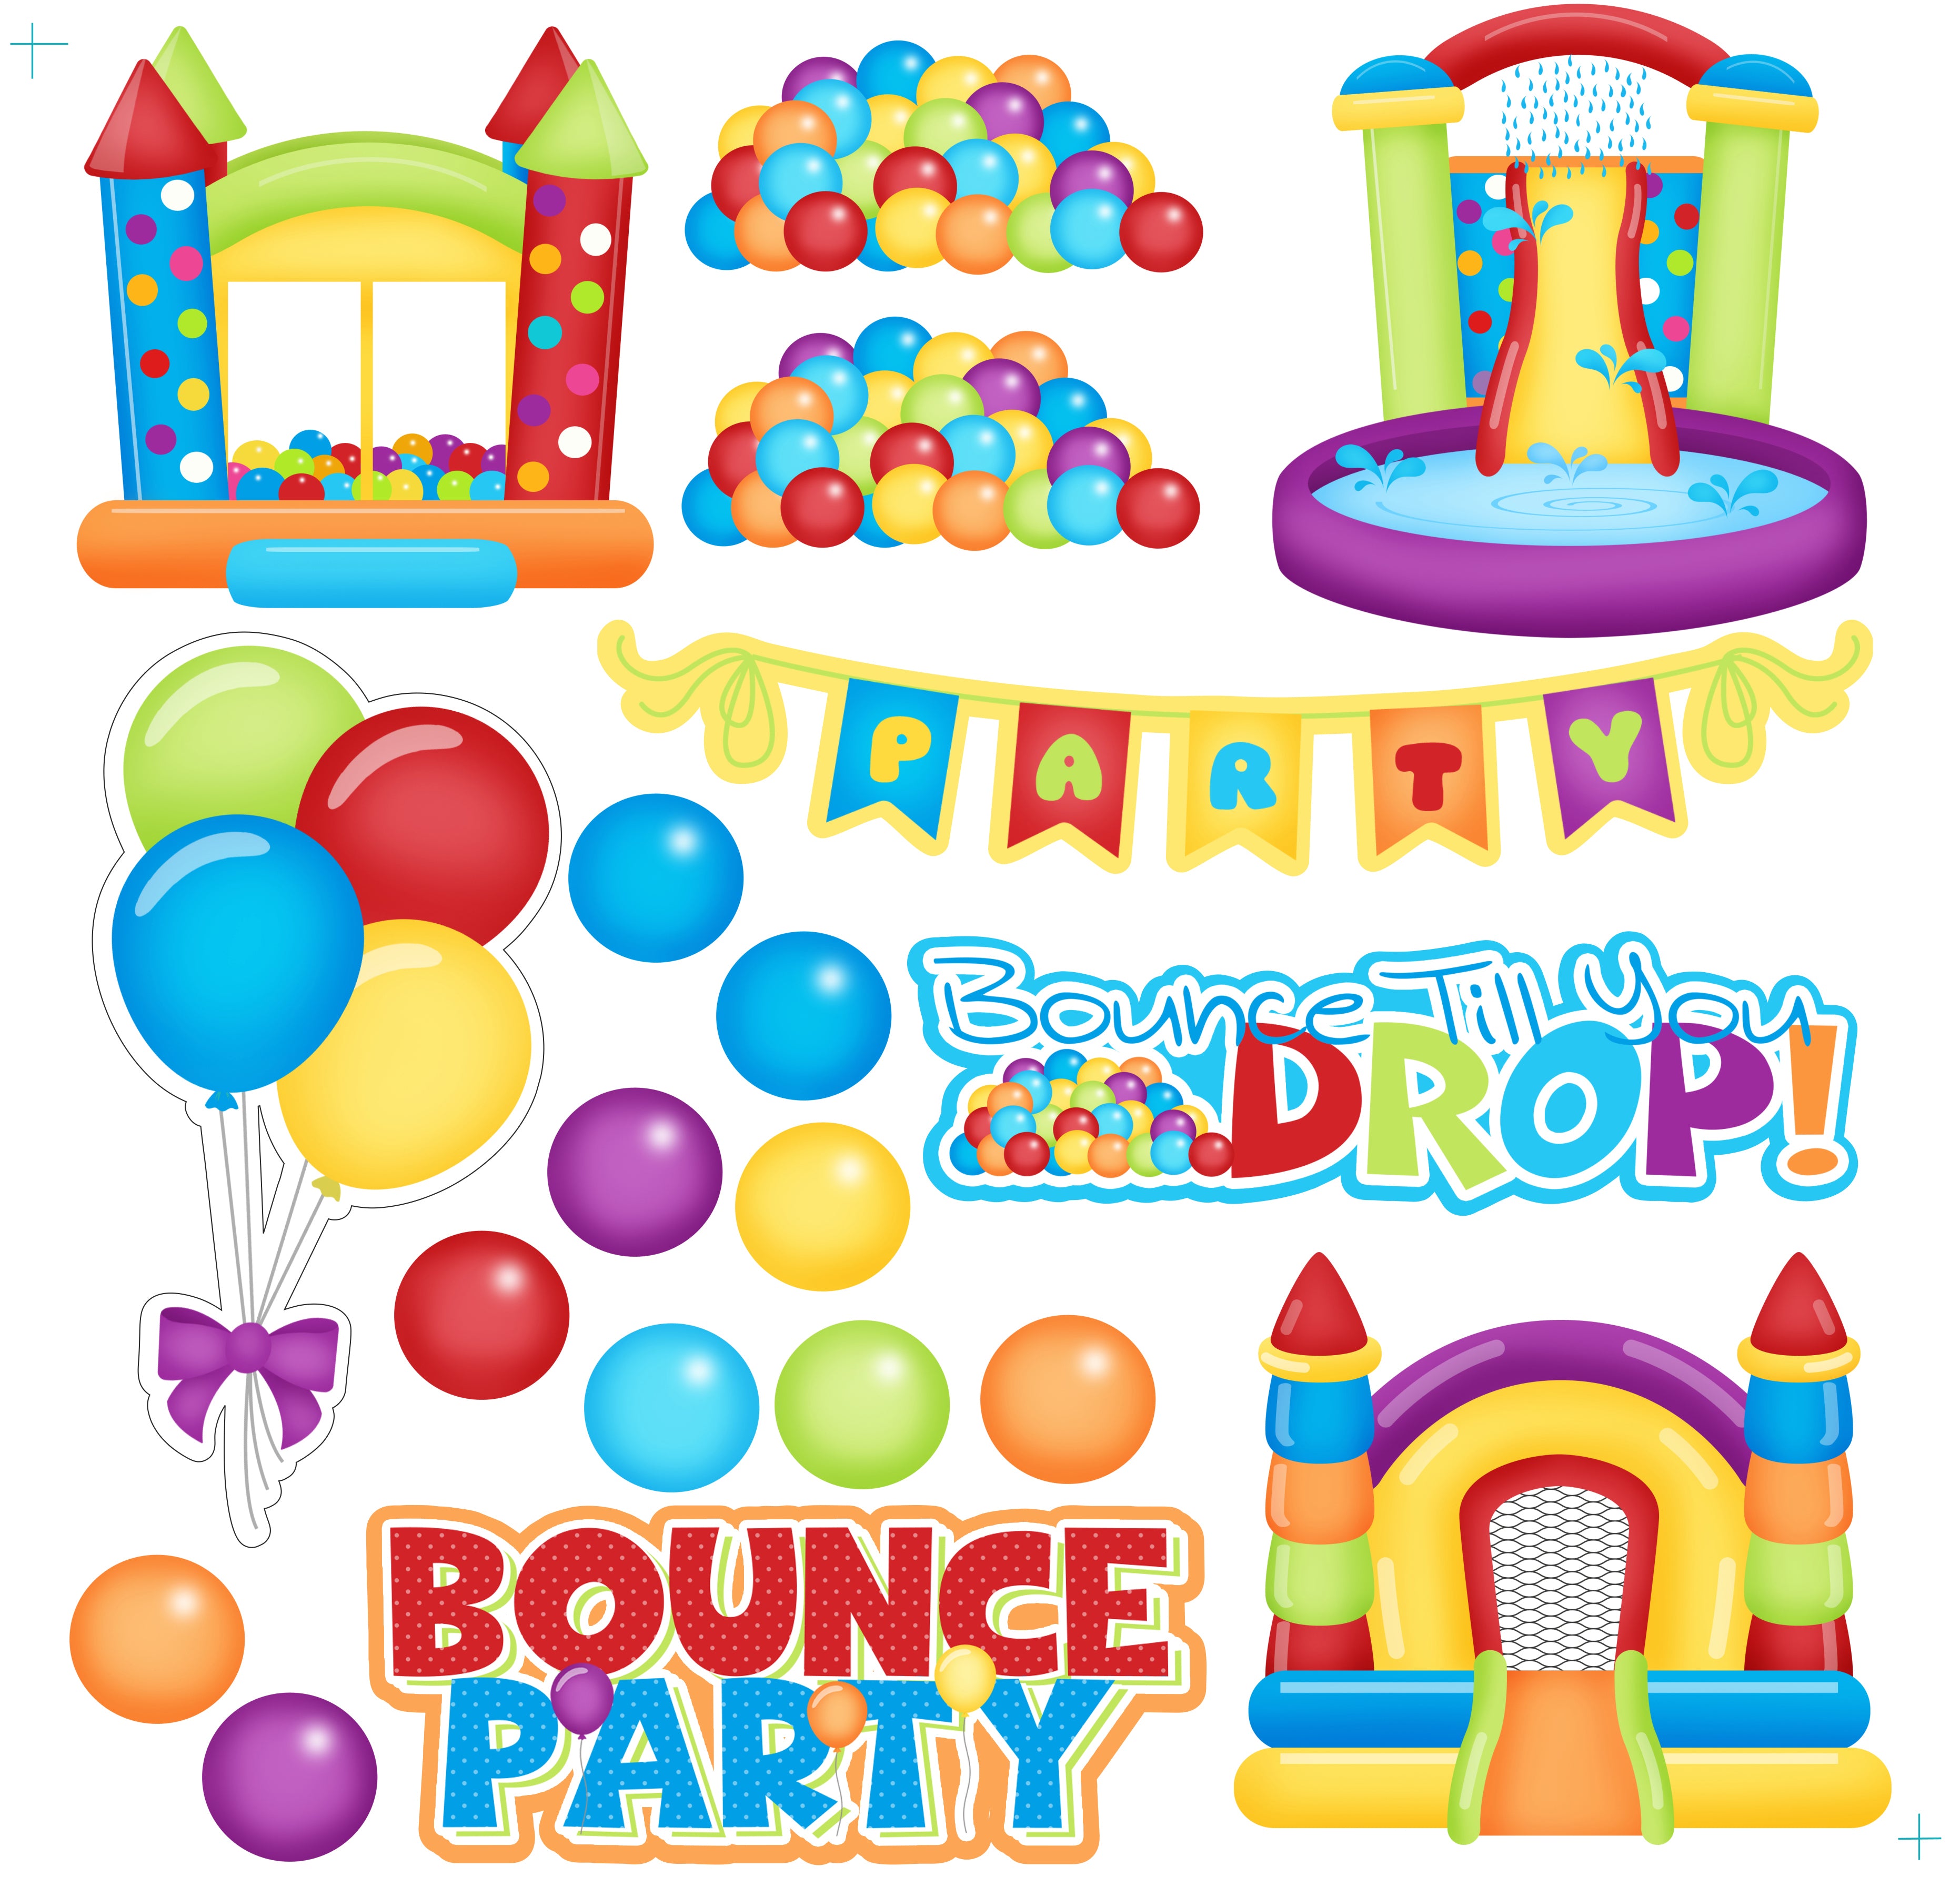 Bounce House 12 x 12 Double-Sided Scrapbook Paper & Embellishment Kit by SSC Designs